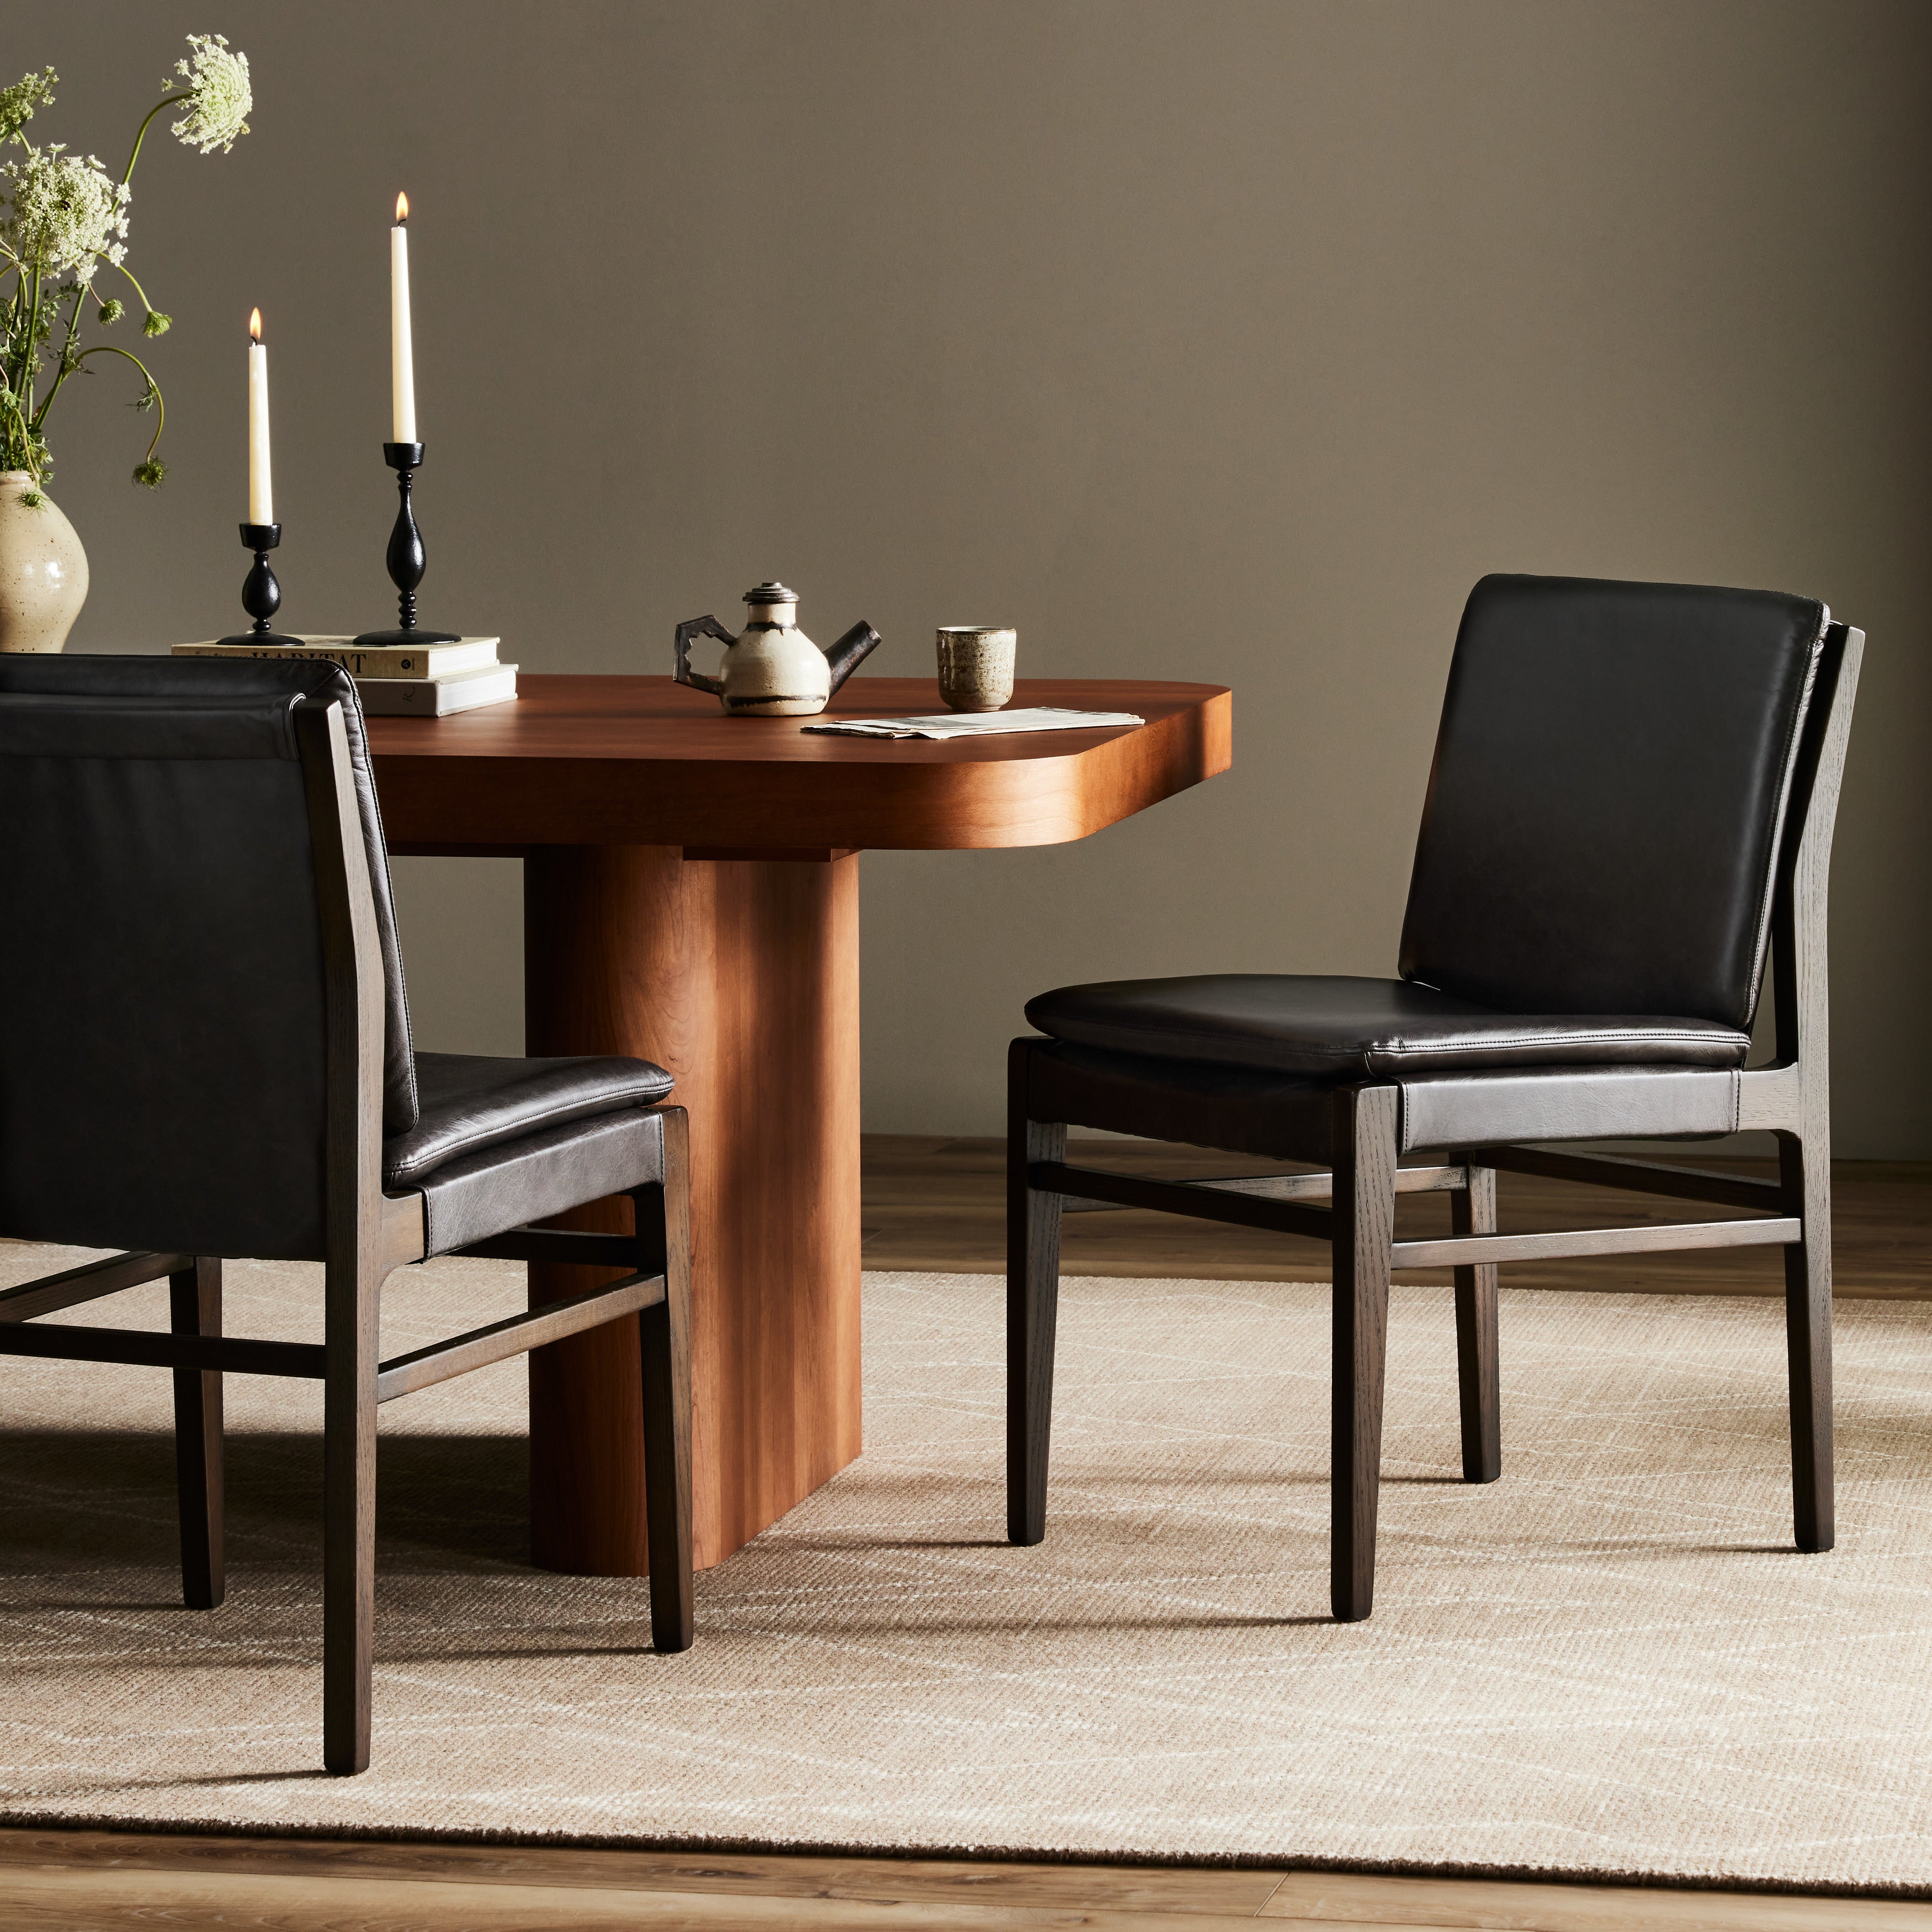 Modern and transitional, burnt oak nettlewood frames this armless dining chair. Finished with a top-grain leather exclusive to Four Hands. Amethyst Home provides interior design, new construction, custom furniture, and area rugs in the Dallas metro area.